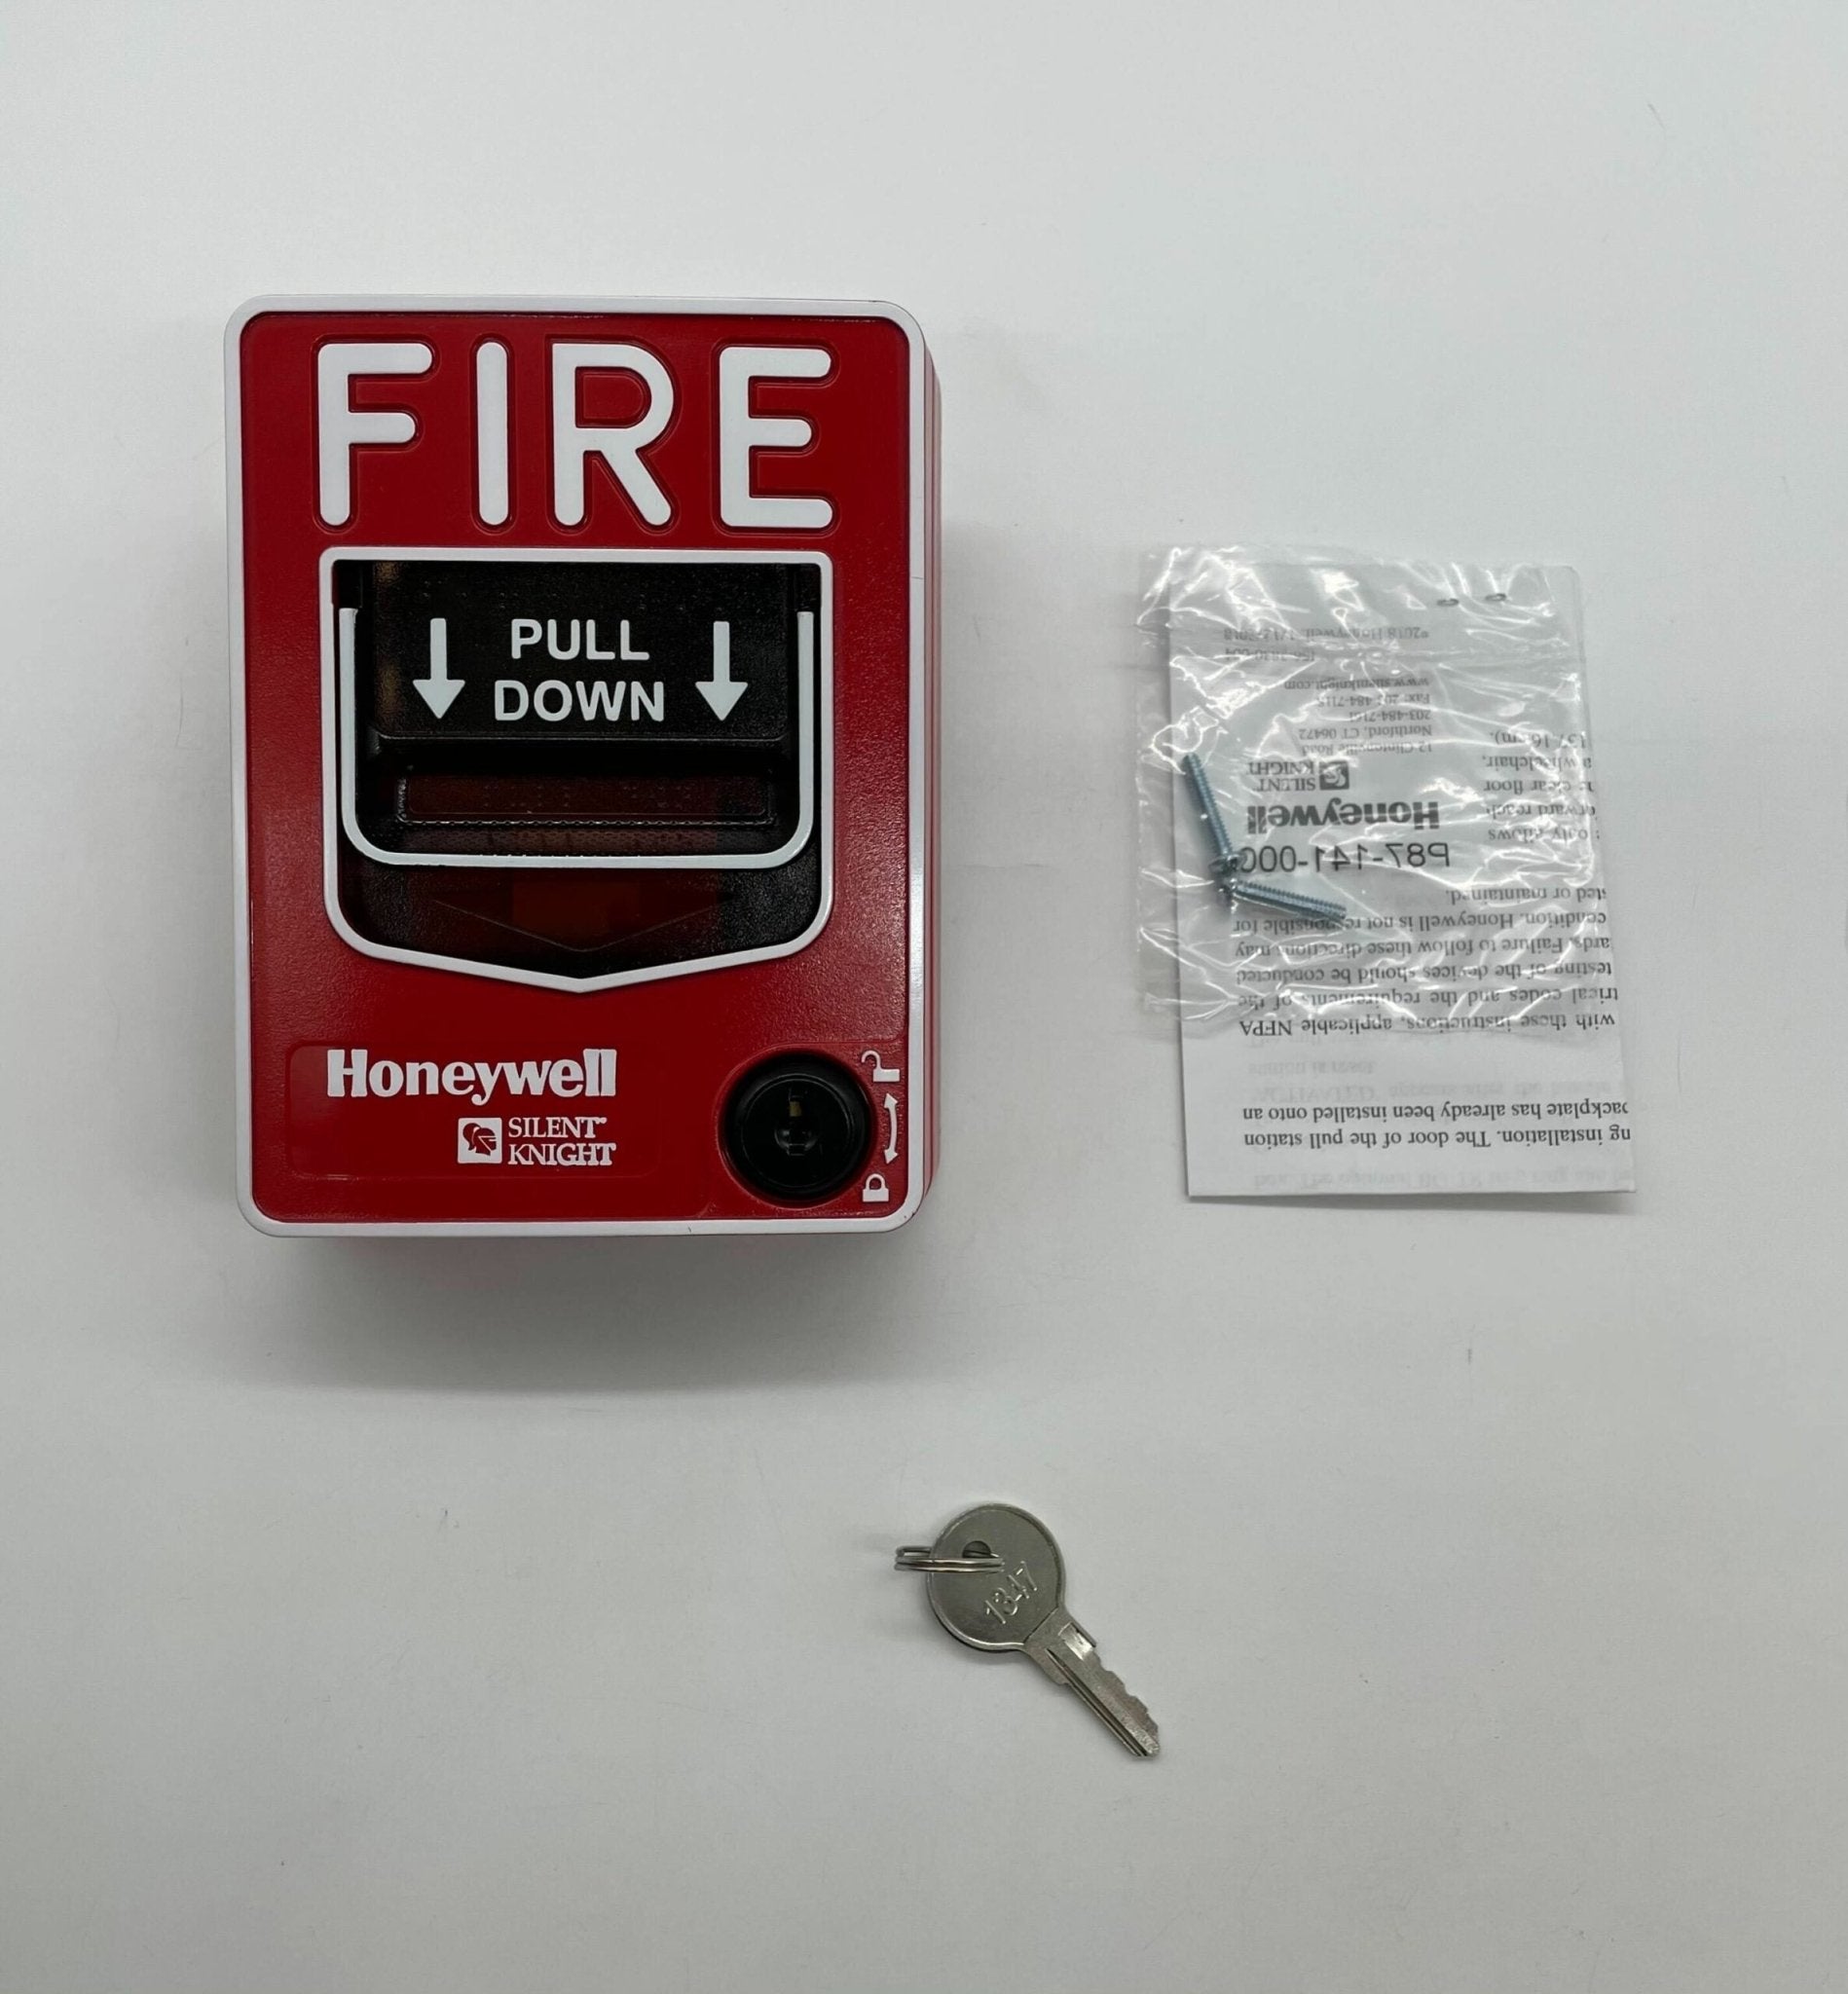 Silent Knight PS-SA - The Fire Alarm Supplier